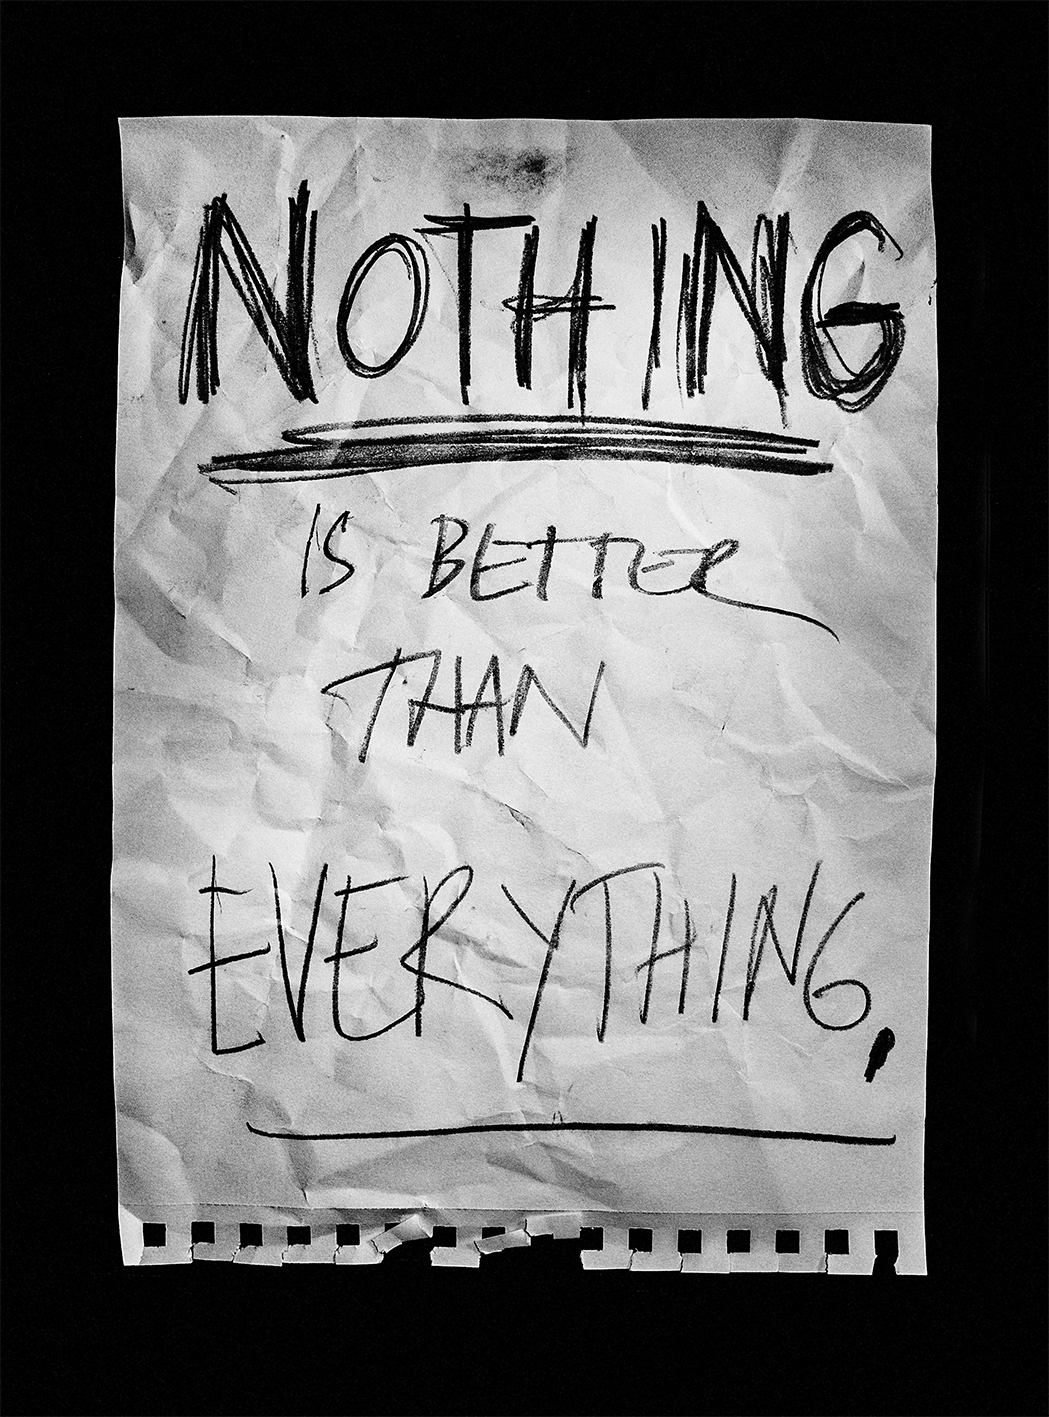 Nothing Is Better Than Everything Waldersten